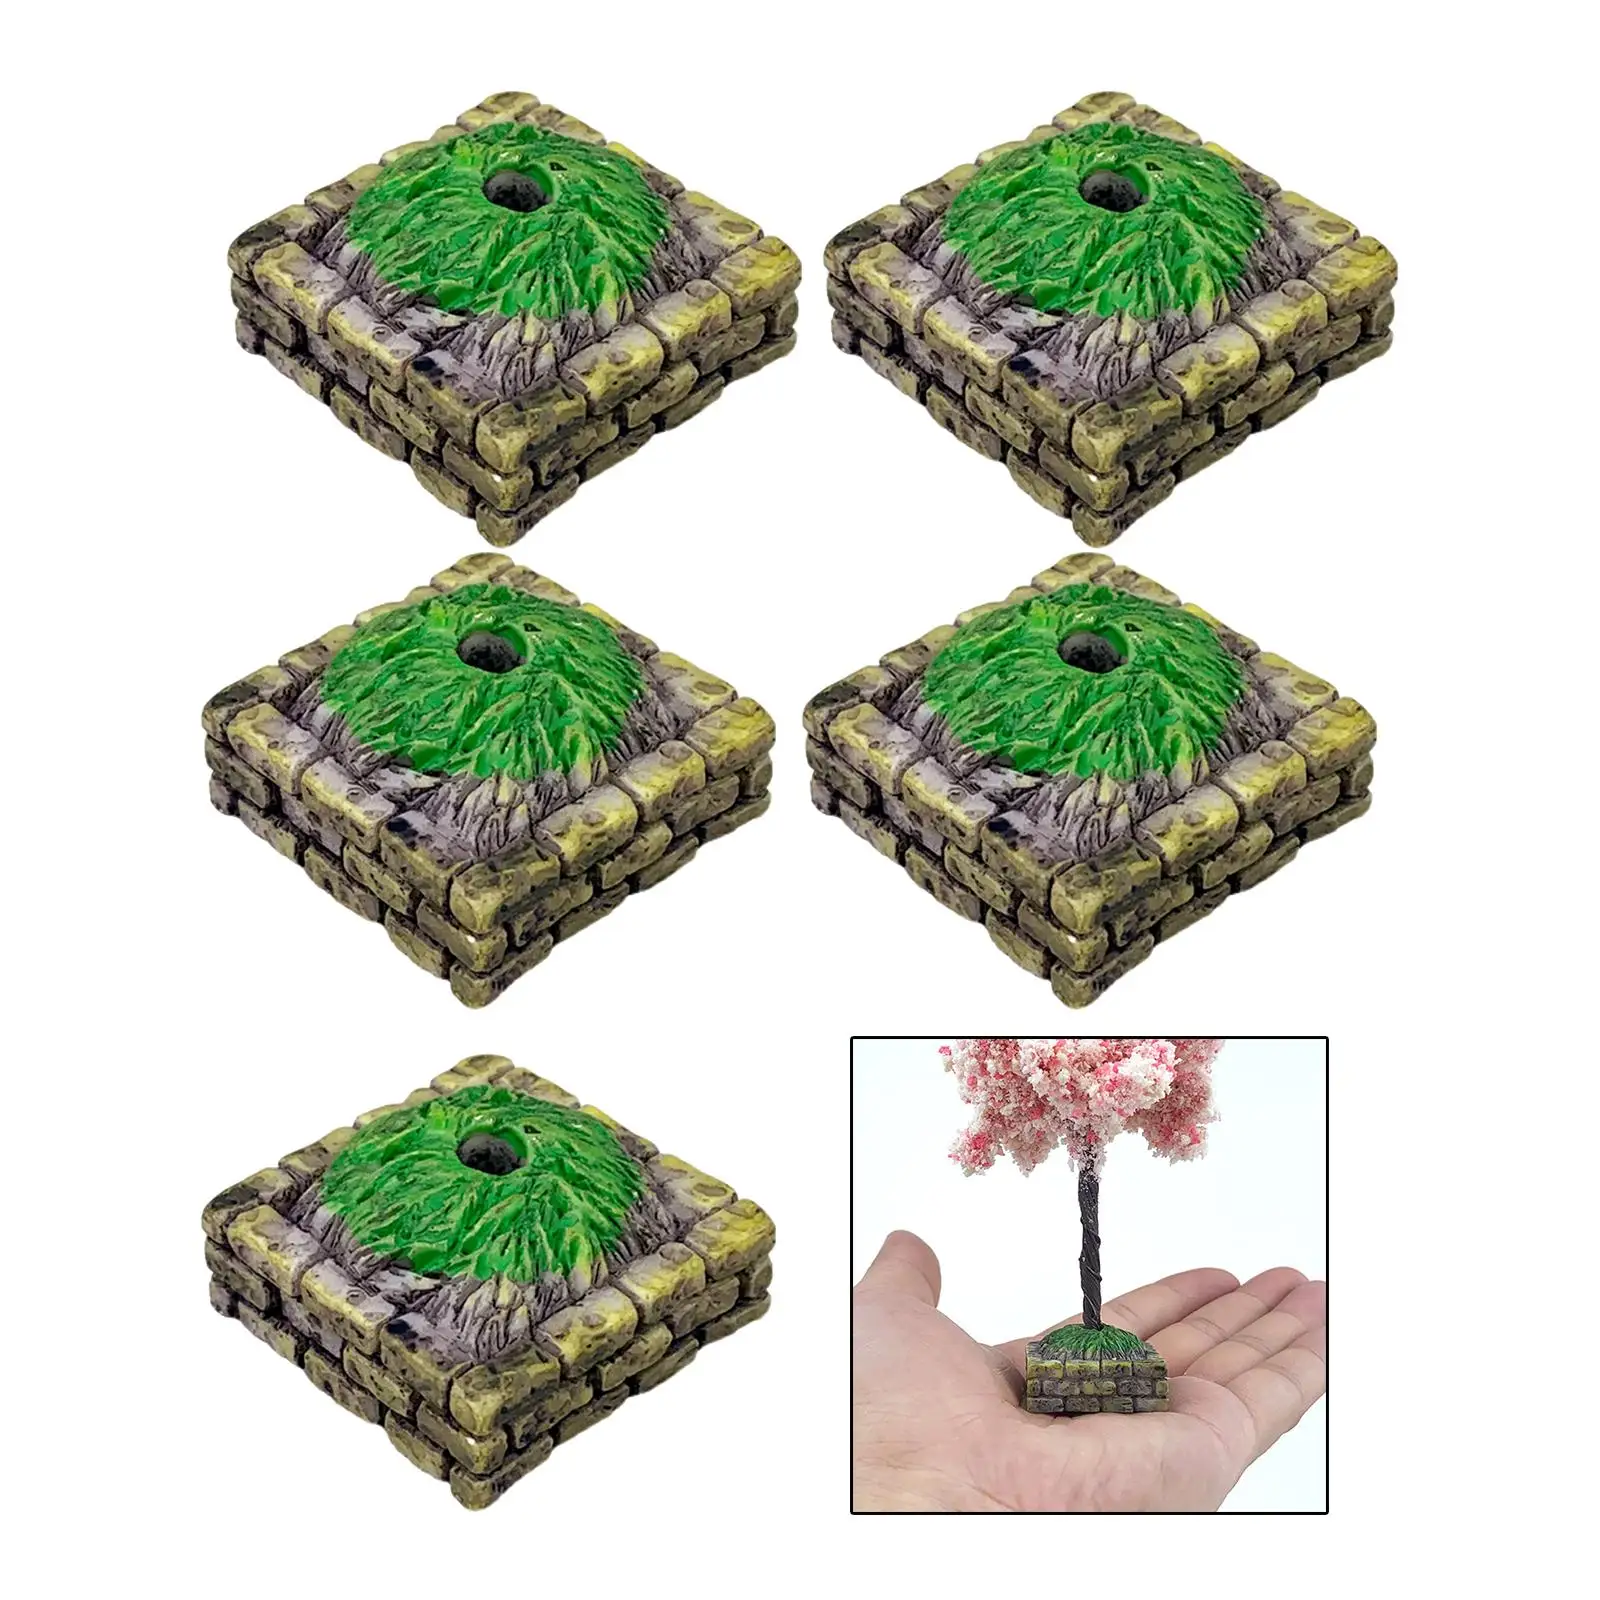 5 Pieces Simulation Tree Altar Base Stand DIY Supplies Multipurpose Practical Decorative Figurines for Fairy Garden Sand Table